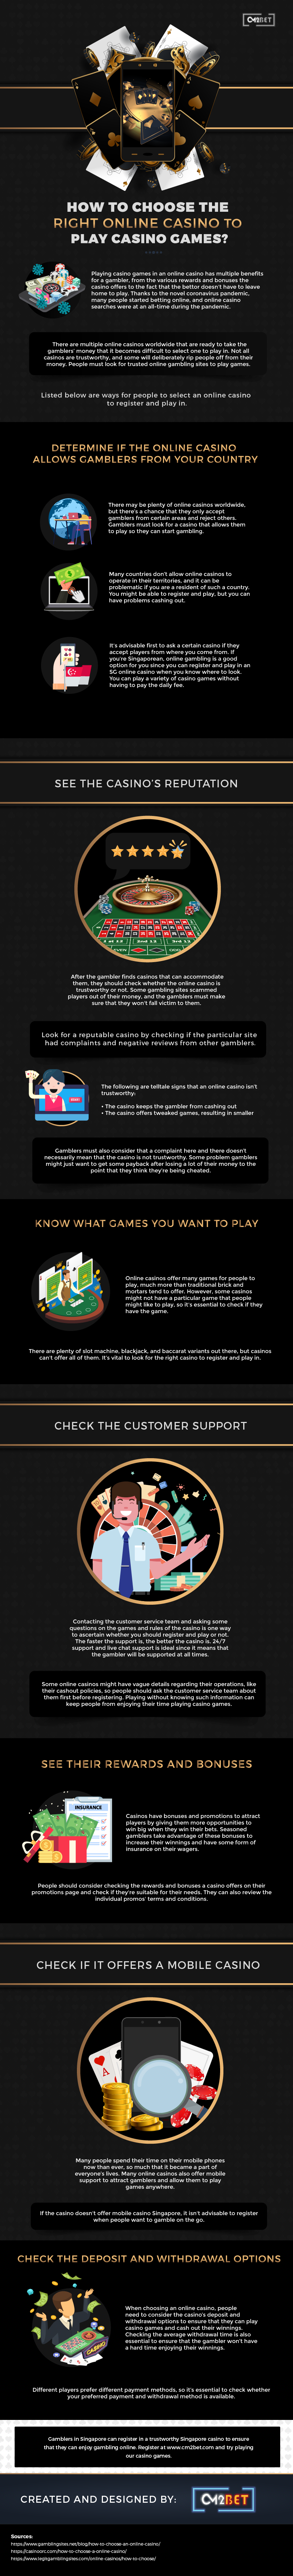 How to Choose the Right Online Casino to Play Casino Games - Infographic